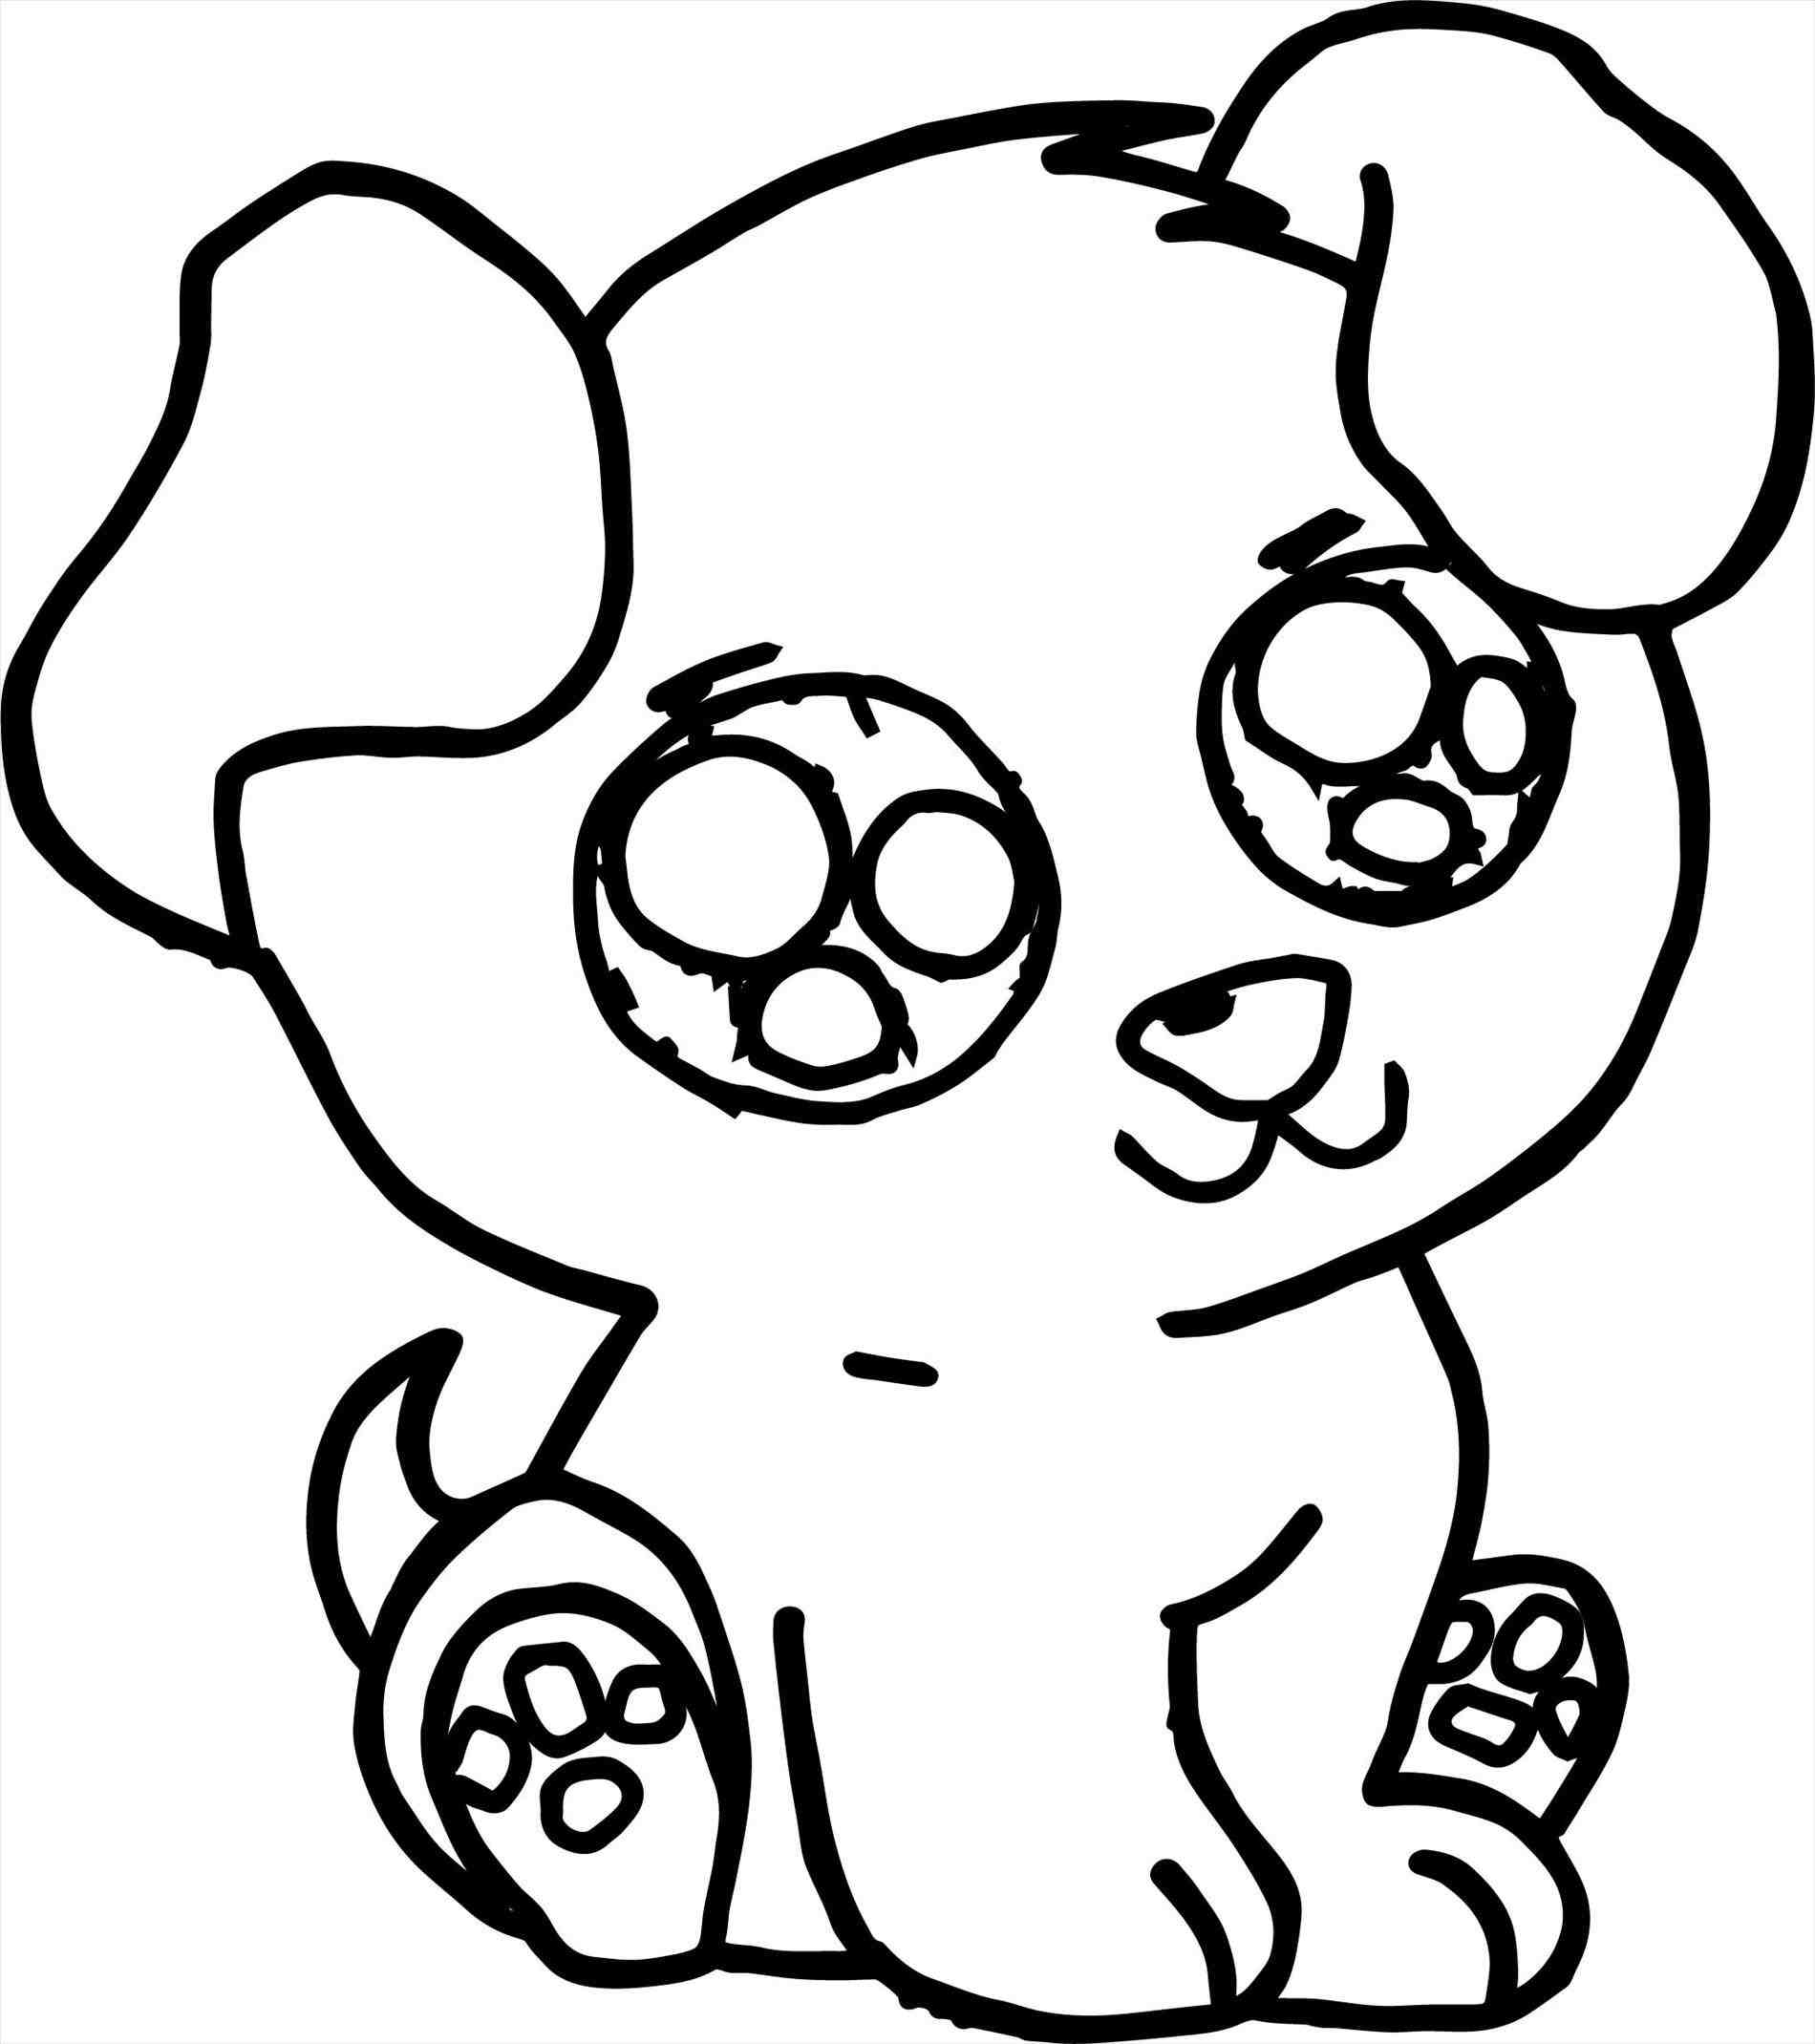 Puppy Cartoon Coloring Pages at Free for